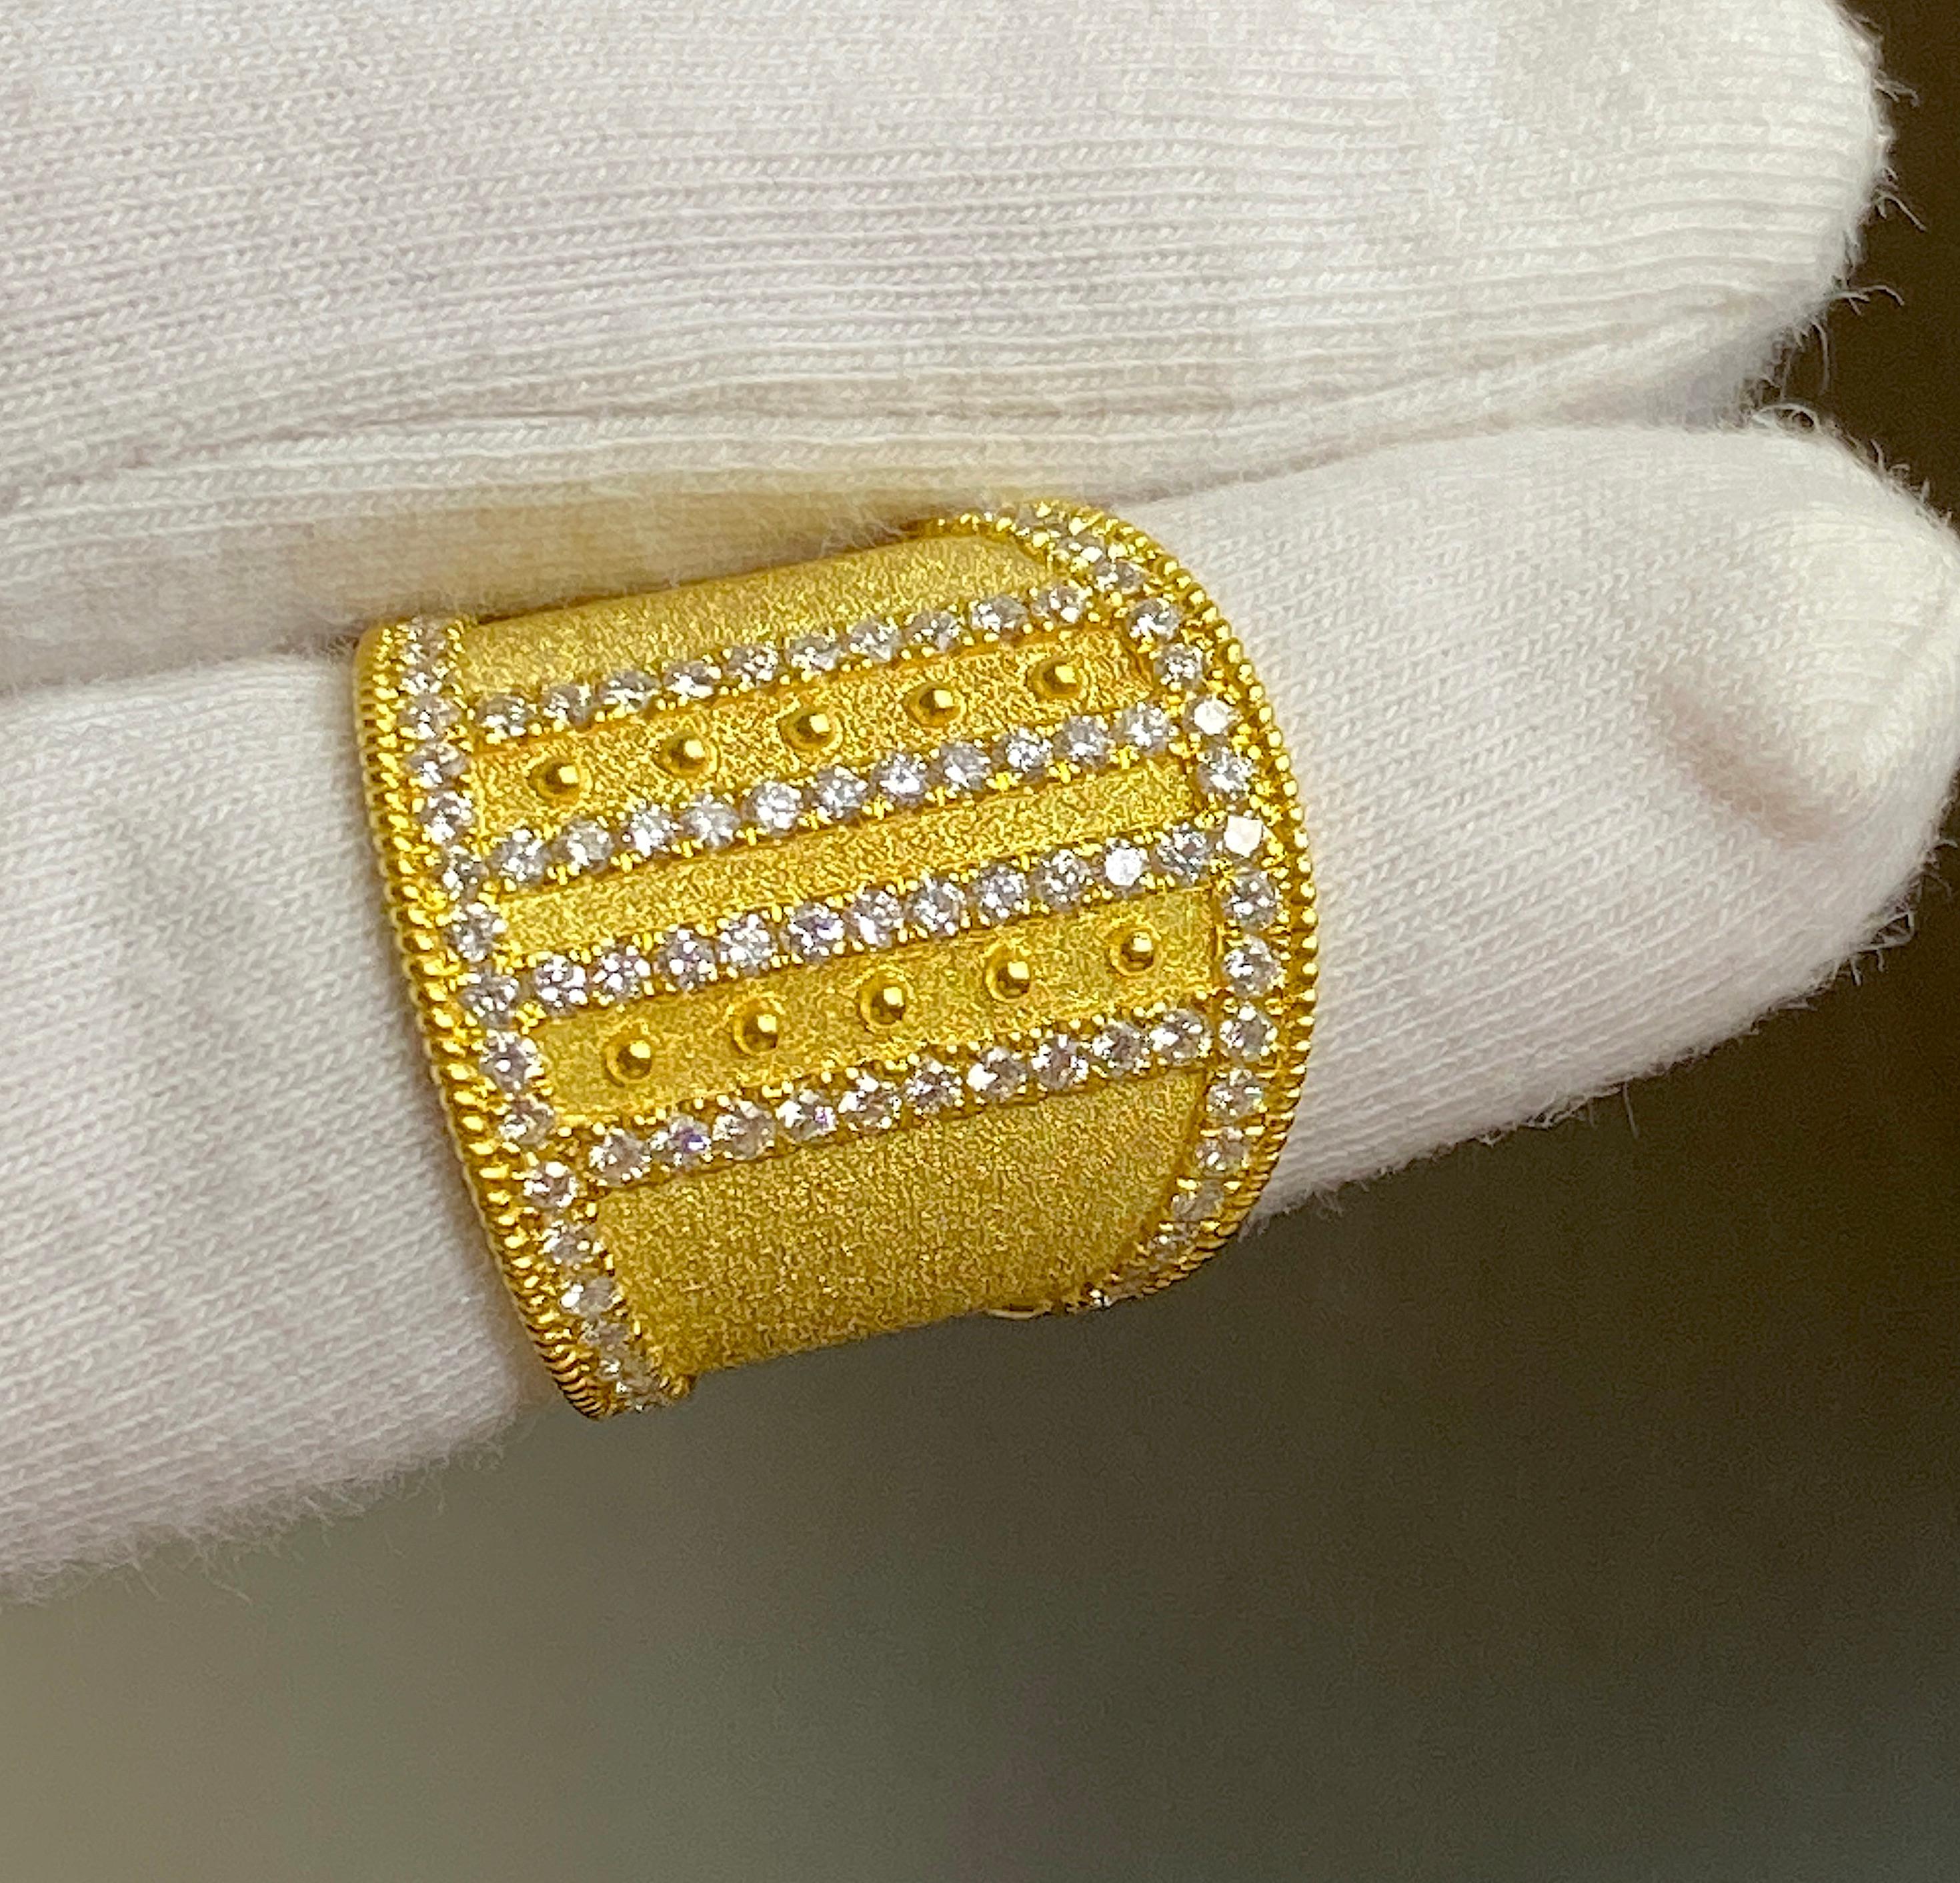 You are admiring S.Georgios designer 18 Karat Solid Yellow Gold Wide Ring all handmade in Byzantine style and a stunning unique velvet background. This gorgeous ring features  1.08 Carats of Brilliant-cut White Diamonds around the edges and in